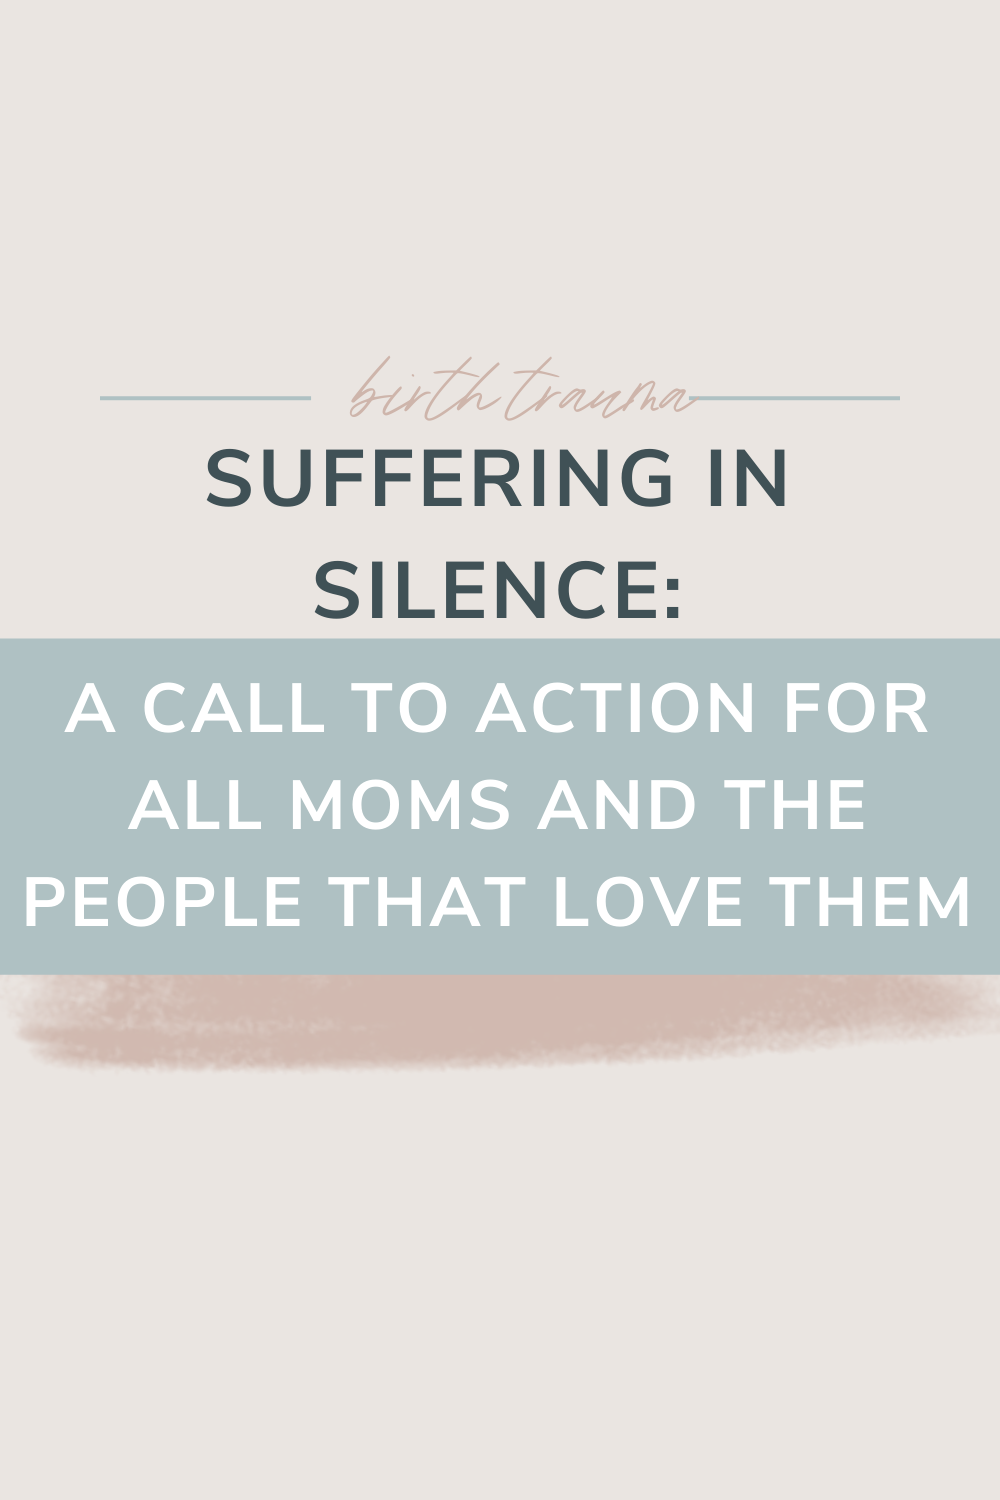 Suffering in Silence: A Call to Action for All Moms and the People that Love Them | You NEED to read this blog. We have to support mothers, we have to stand arm in arm, hand in hand. This call to action is for every person out there, read on...